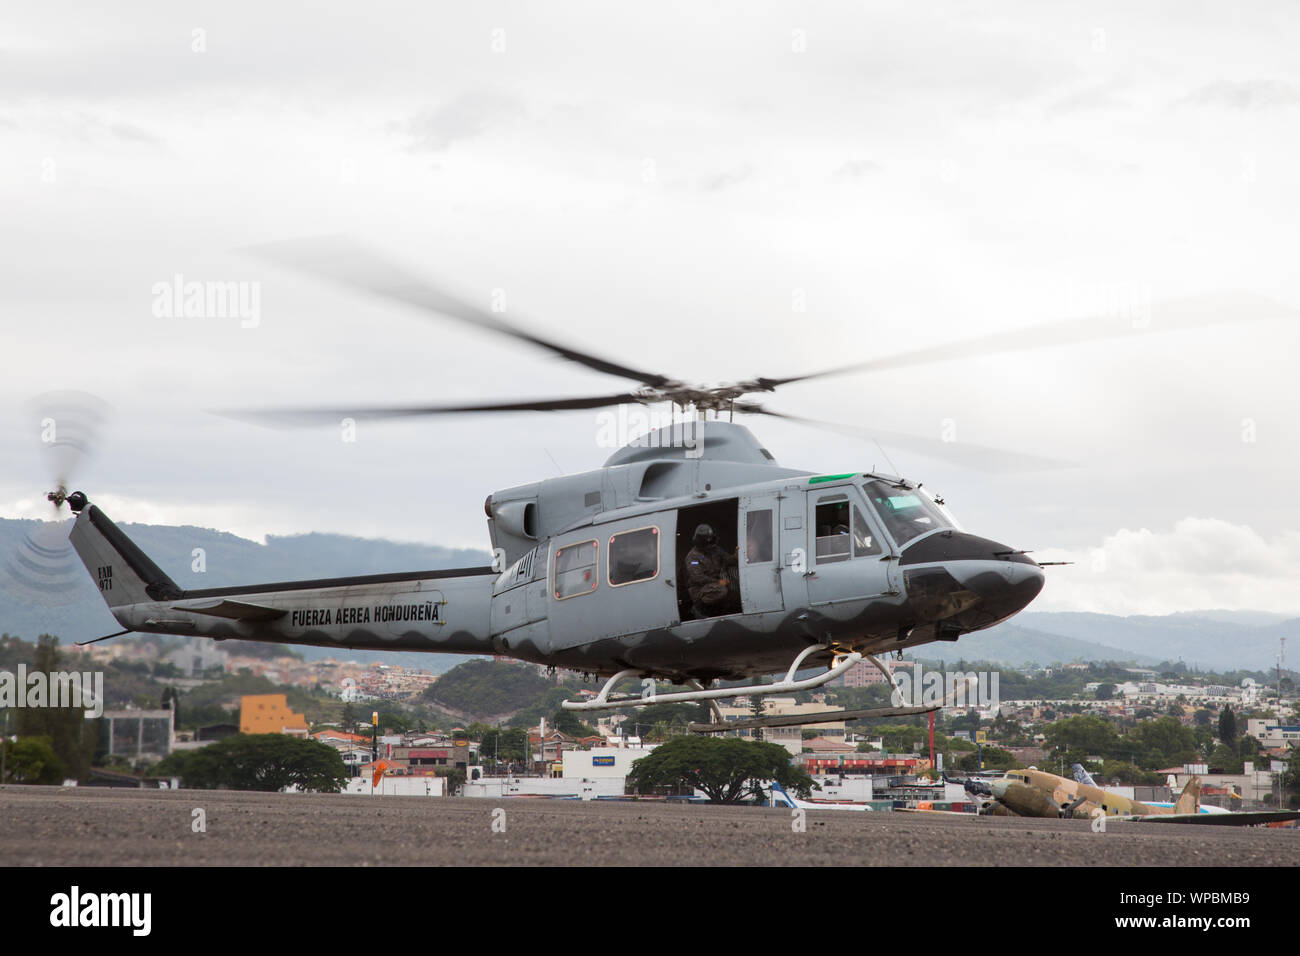 190906-A-IF052-0063 TEGUCIGALPA, Honduras (September 6, 2019) -- A Honduran air force helicopter carrying patients with simulated injuries, takes off, during a mass casualty drill with the U.S. Medical Engagement Team and Honduran military medical personnel, as part of Southern Partnership Station (SPS) 2019. SPS is an annual series of U.S. Navy deployments focused on exchanges with regional partner nation militaries and security forces. SPS 19 consists of fly-away deployments of adaptive force packages to Barbados, Colombia, Guatemala, Honduras and Peru to conduct training and subject matter Stock Photo